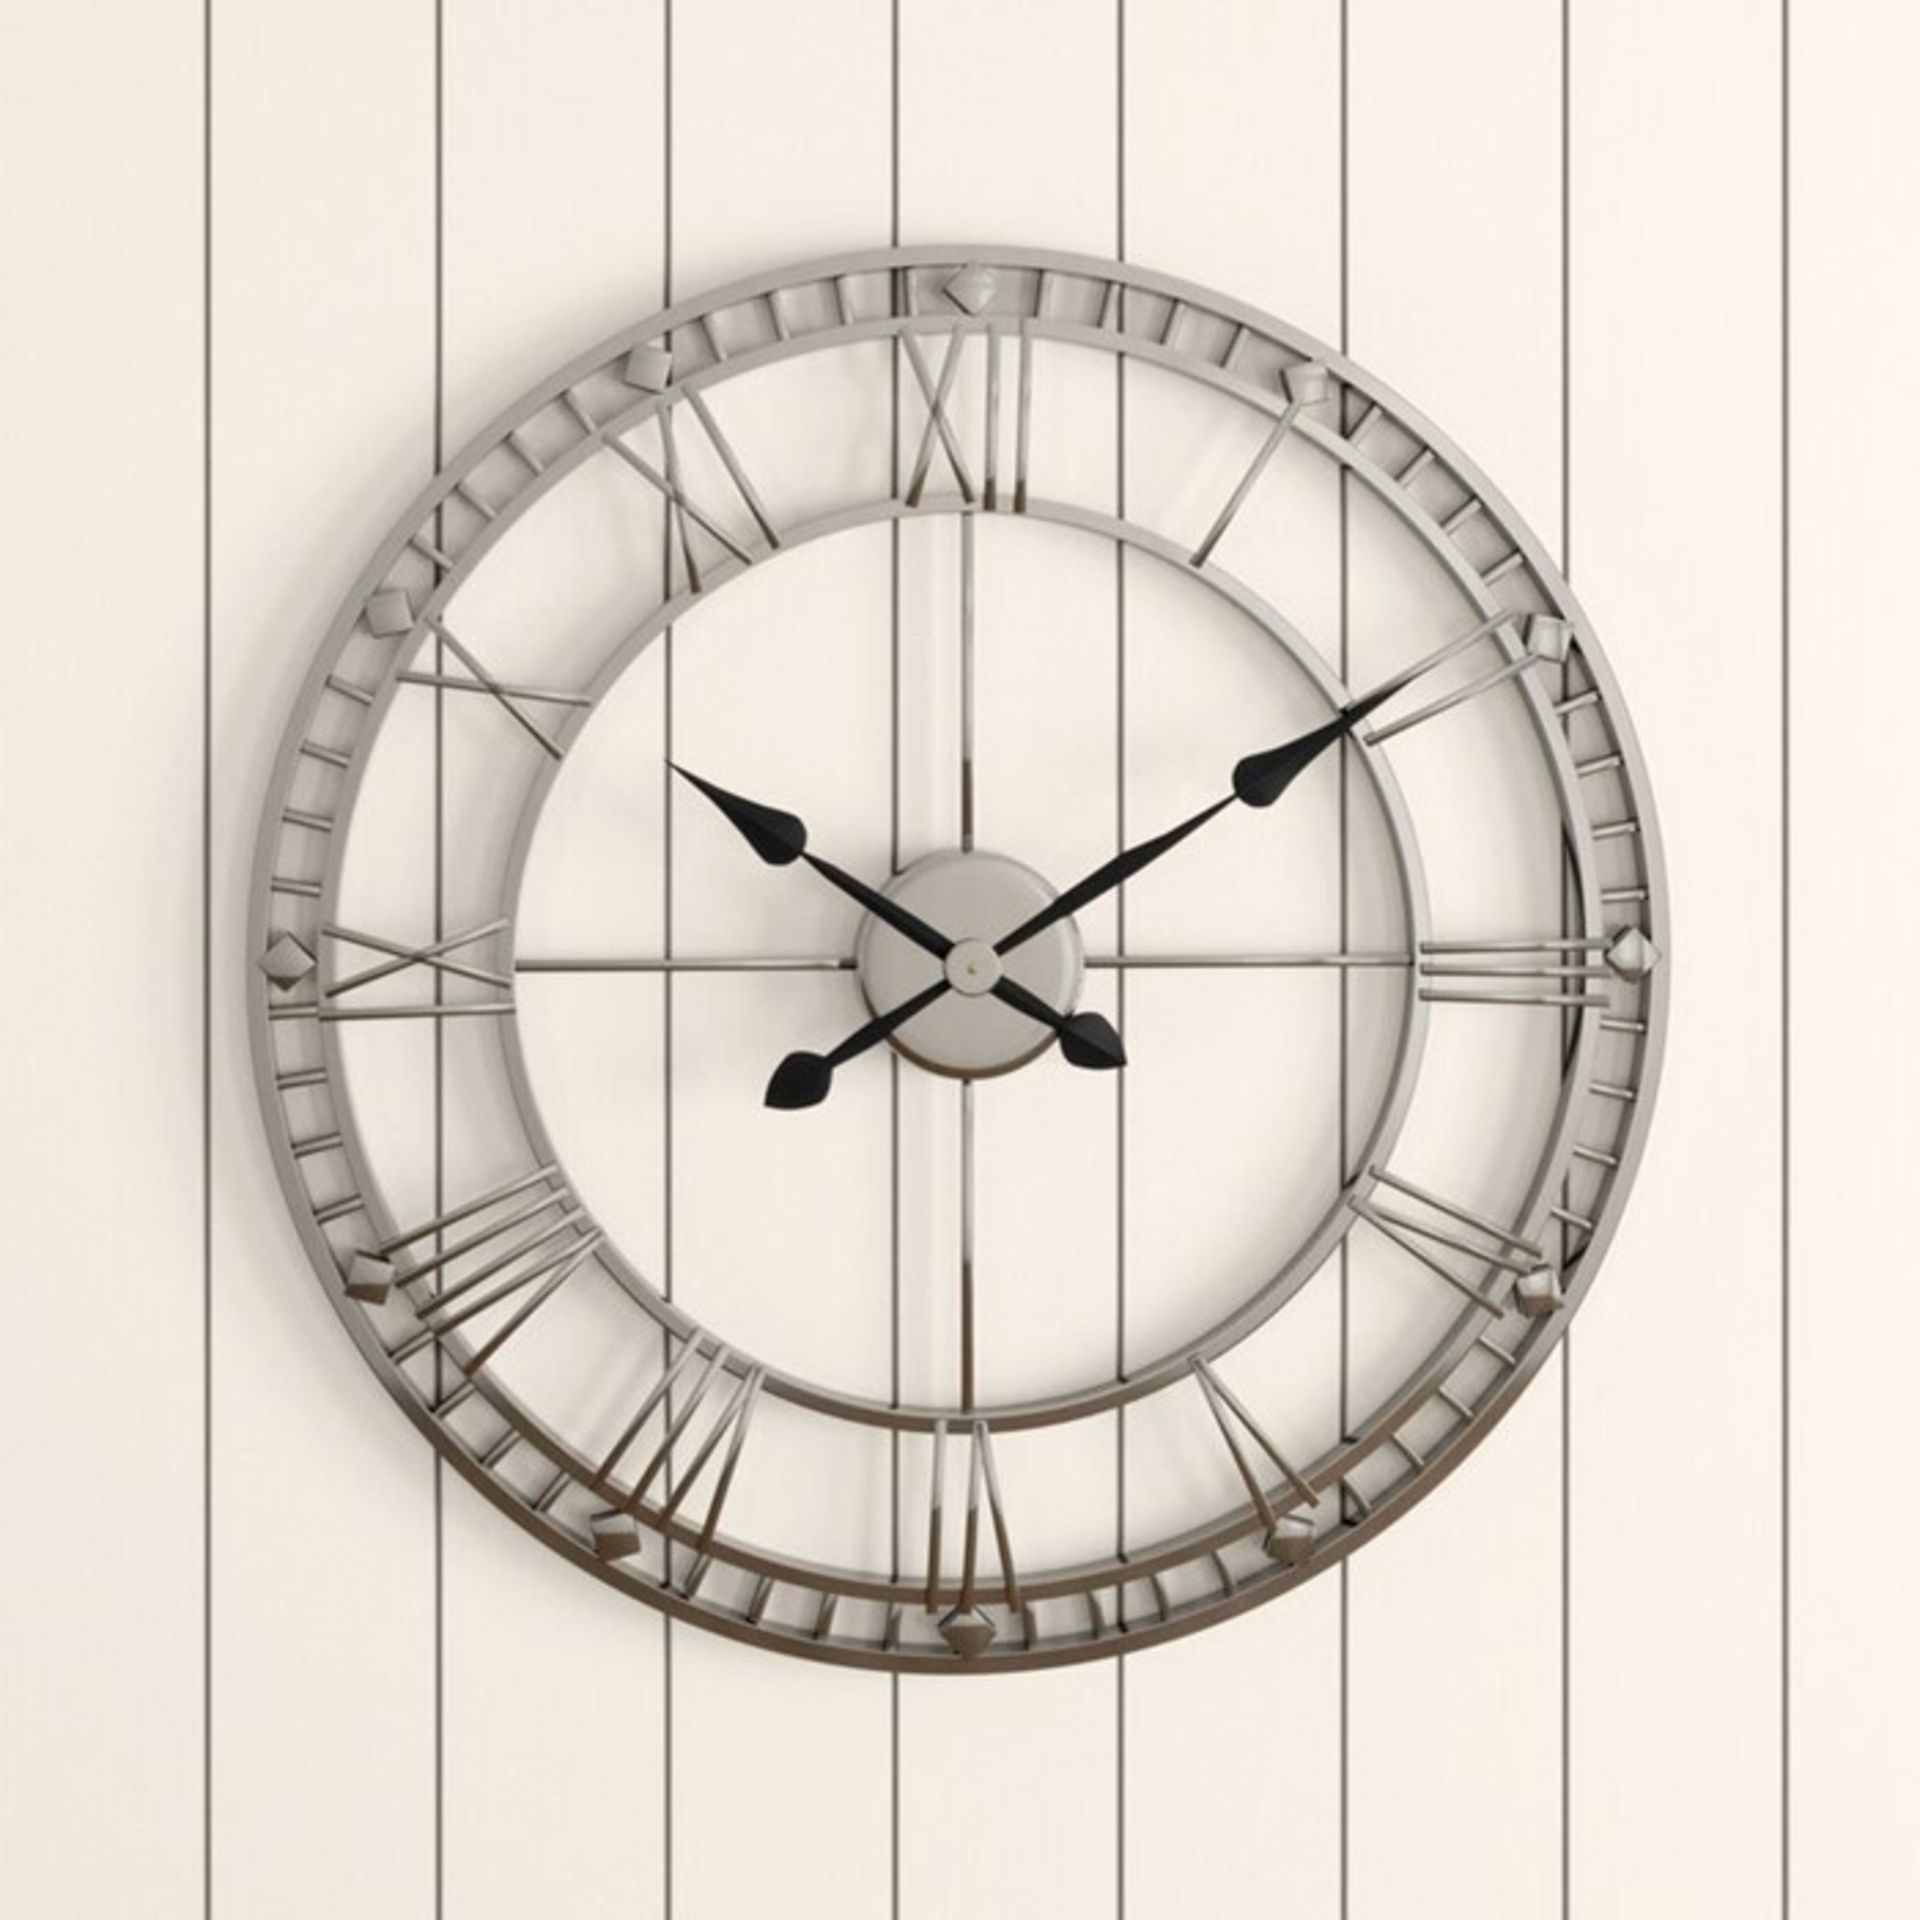 Laurel Foundry, Melody Oversized Metal Round 80cm Wall Clock RRP £79.99 (PACH7817 - 13652/2) 3C